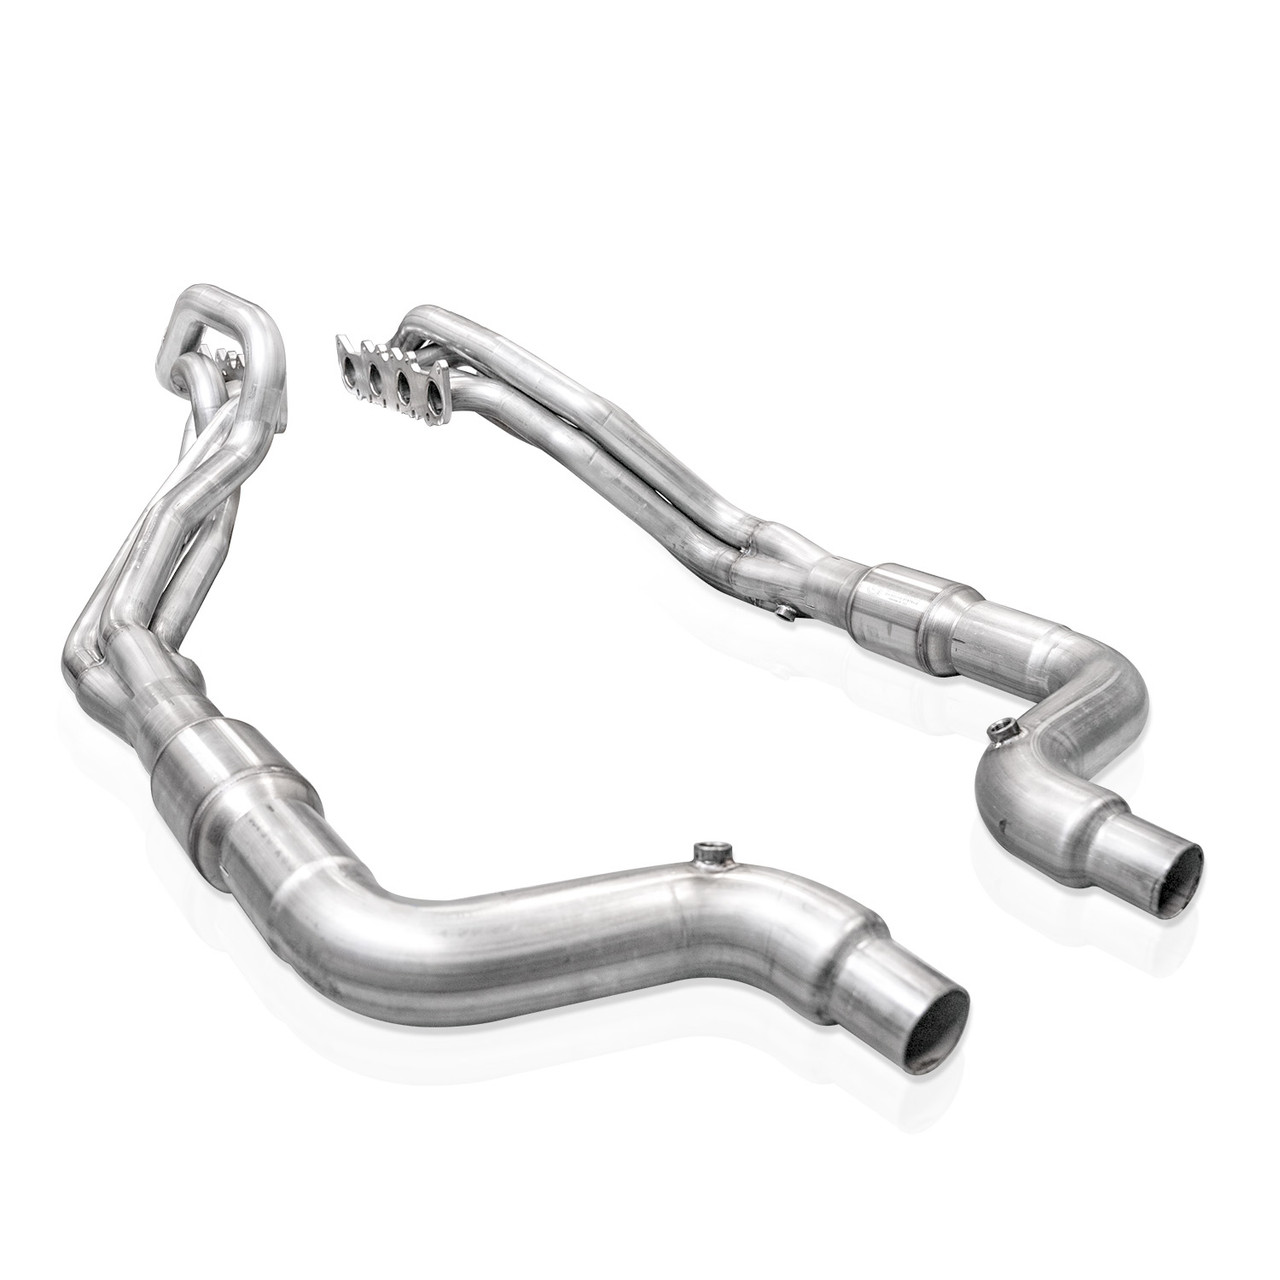 Stainless Works 1 7/8" Long Tube Headers w. High Flow Cats / Factory Connect - S550 / S650 Mustang (M24HCAT)